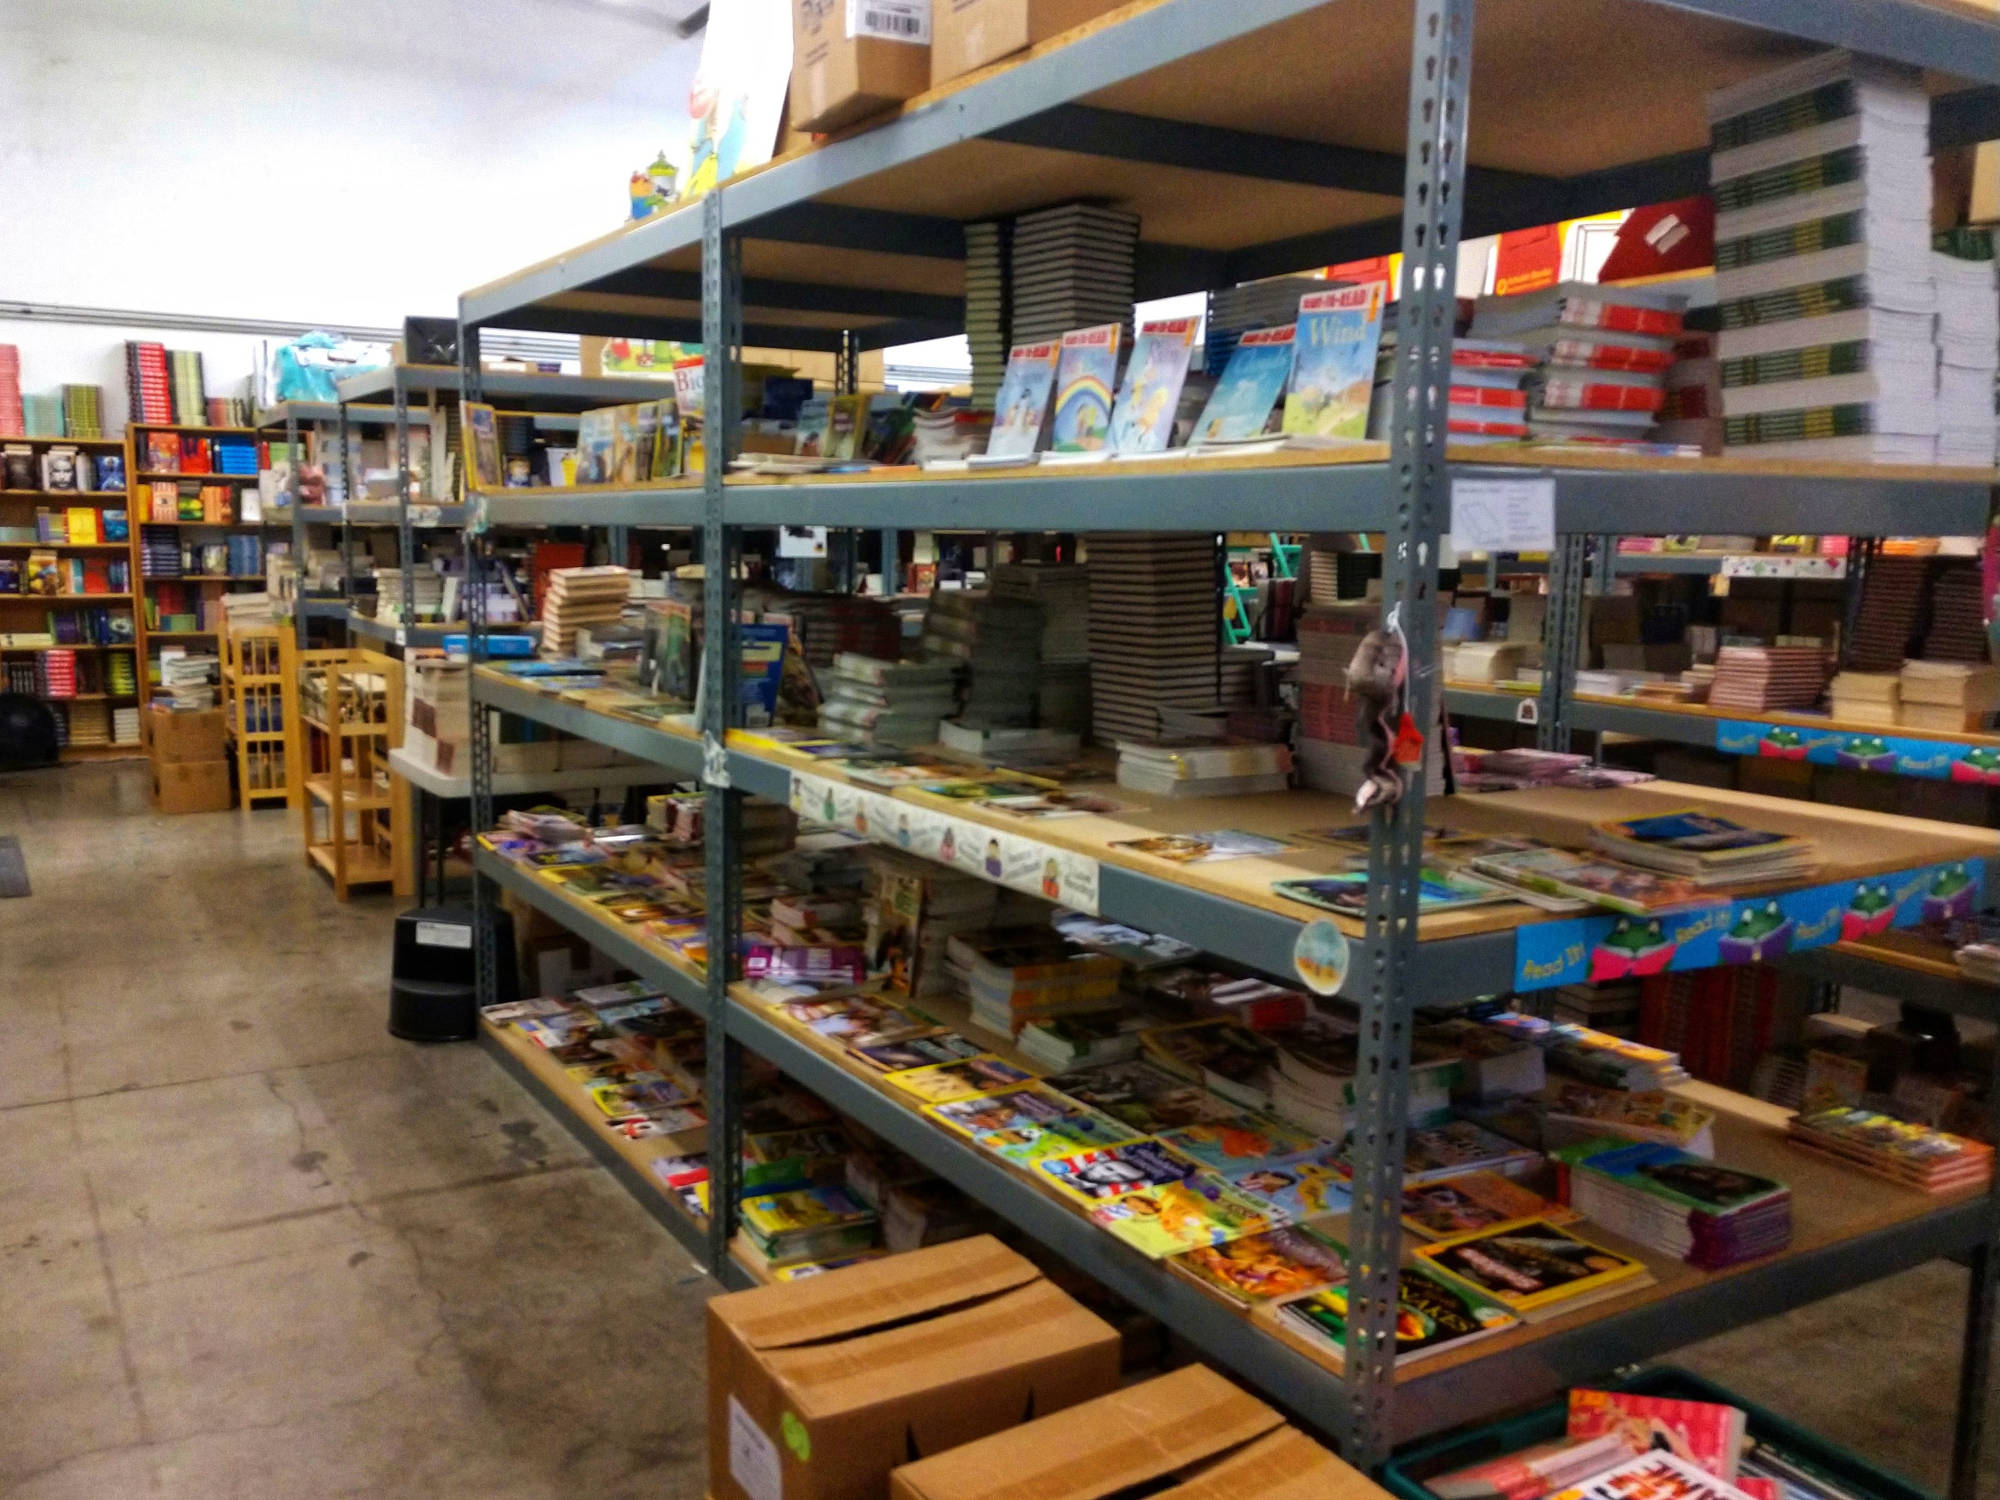 warehouse shelving filled with levelled readers